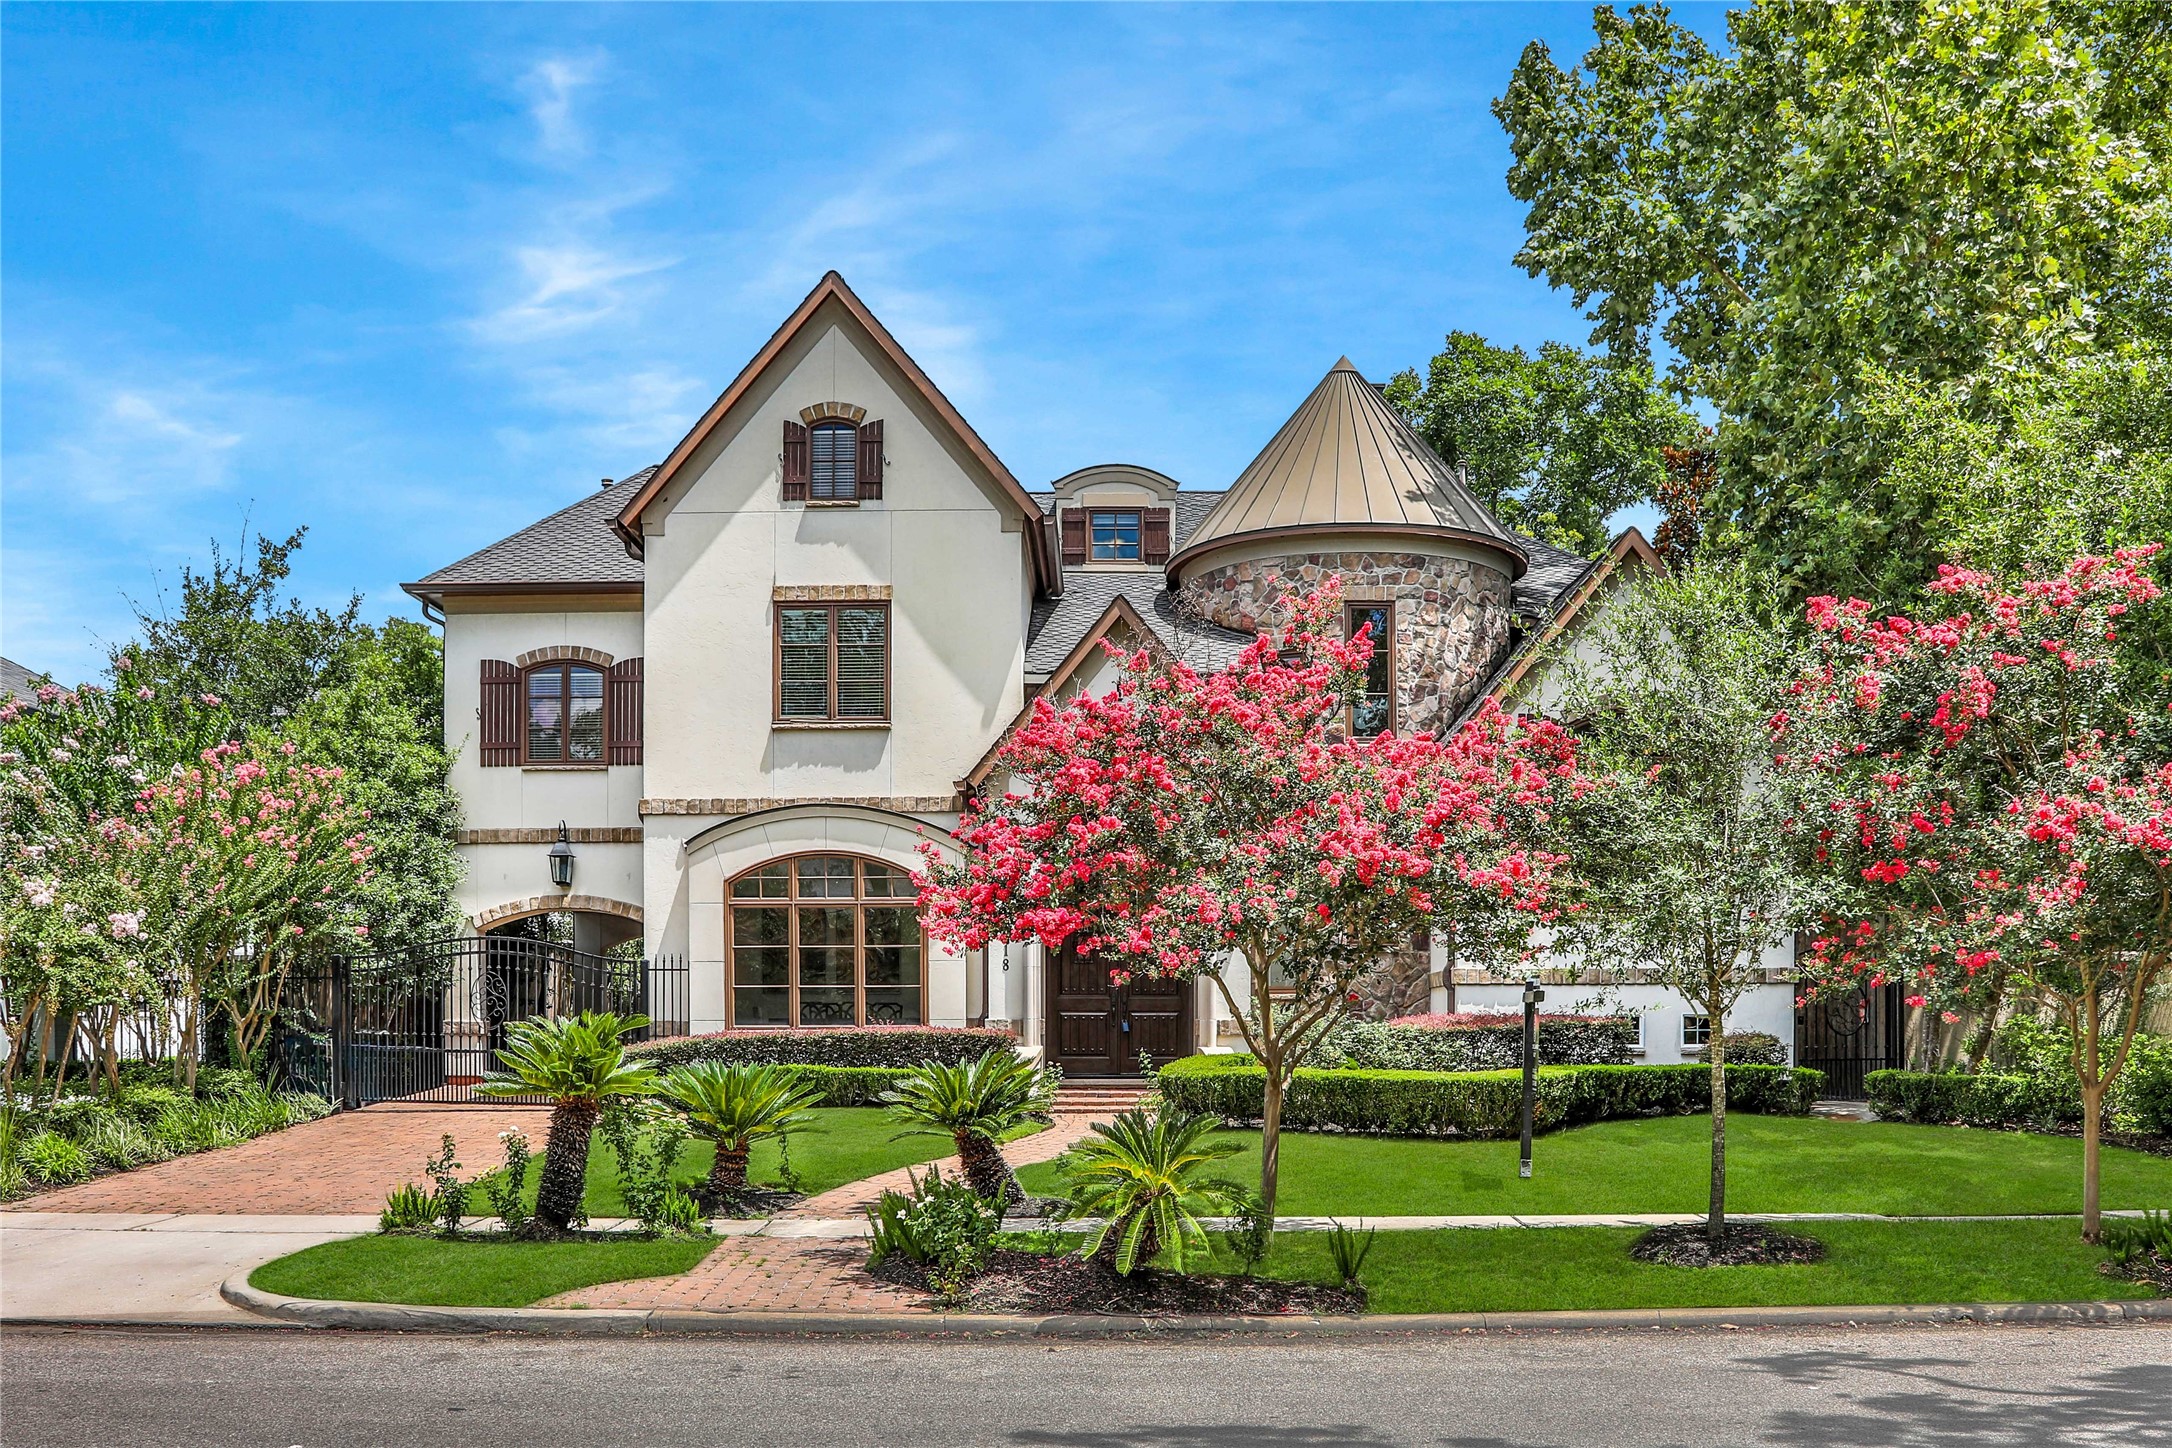 Discover the epitome of luxury living in Houston's prestigious River Oaks area neighborhood with this exceptional 1st-floor renovation in coveted Royden Oaks. This home is truly breathtaking. Whether you're entertaining guests or seeking a tranquil retreat, this property has it all